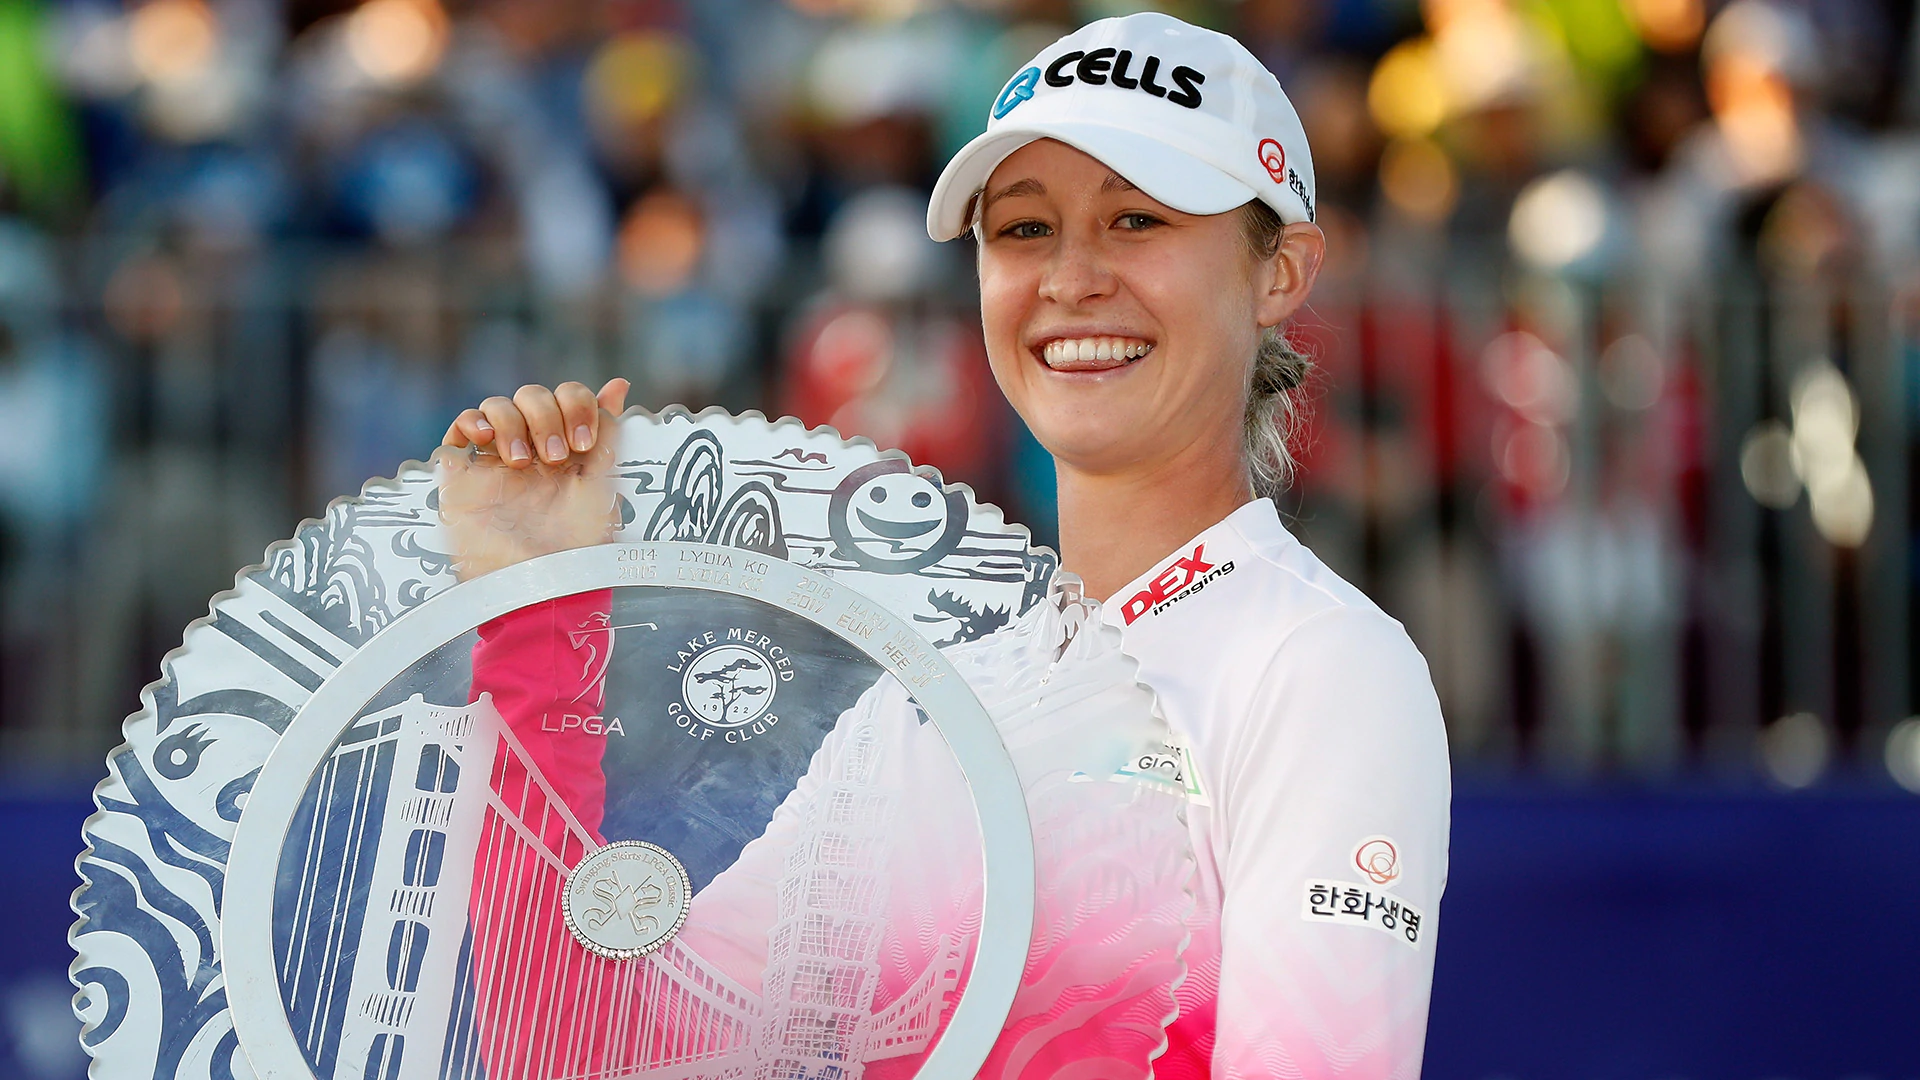 Fresh off her first win, N. Korda heads to Japan